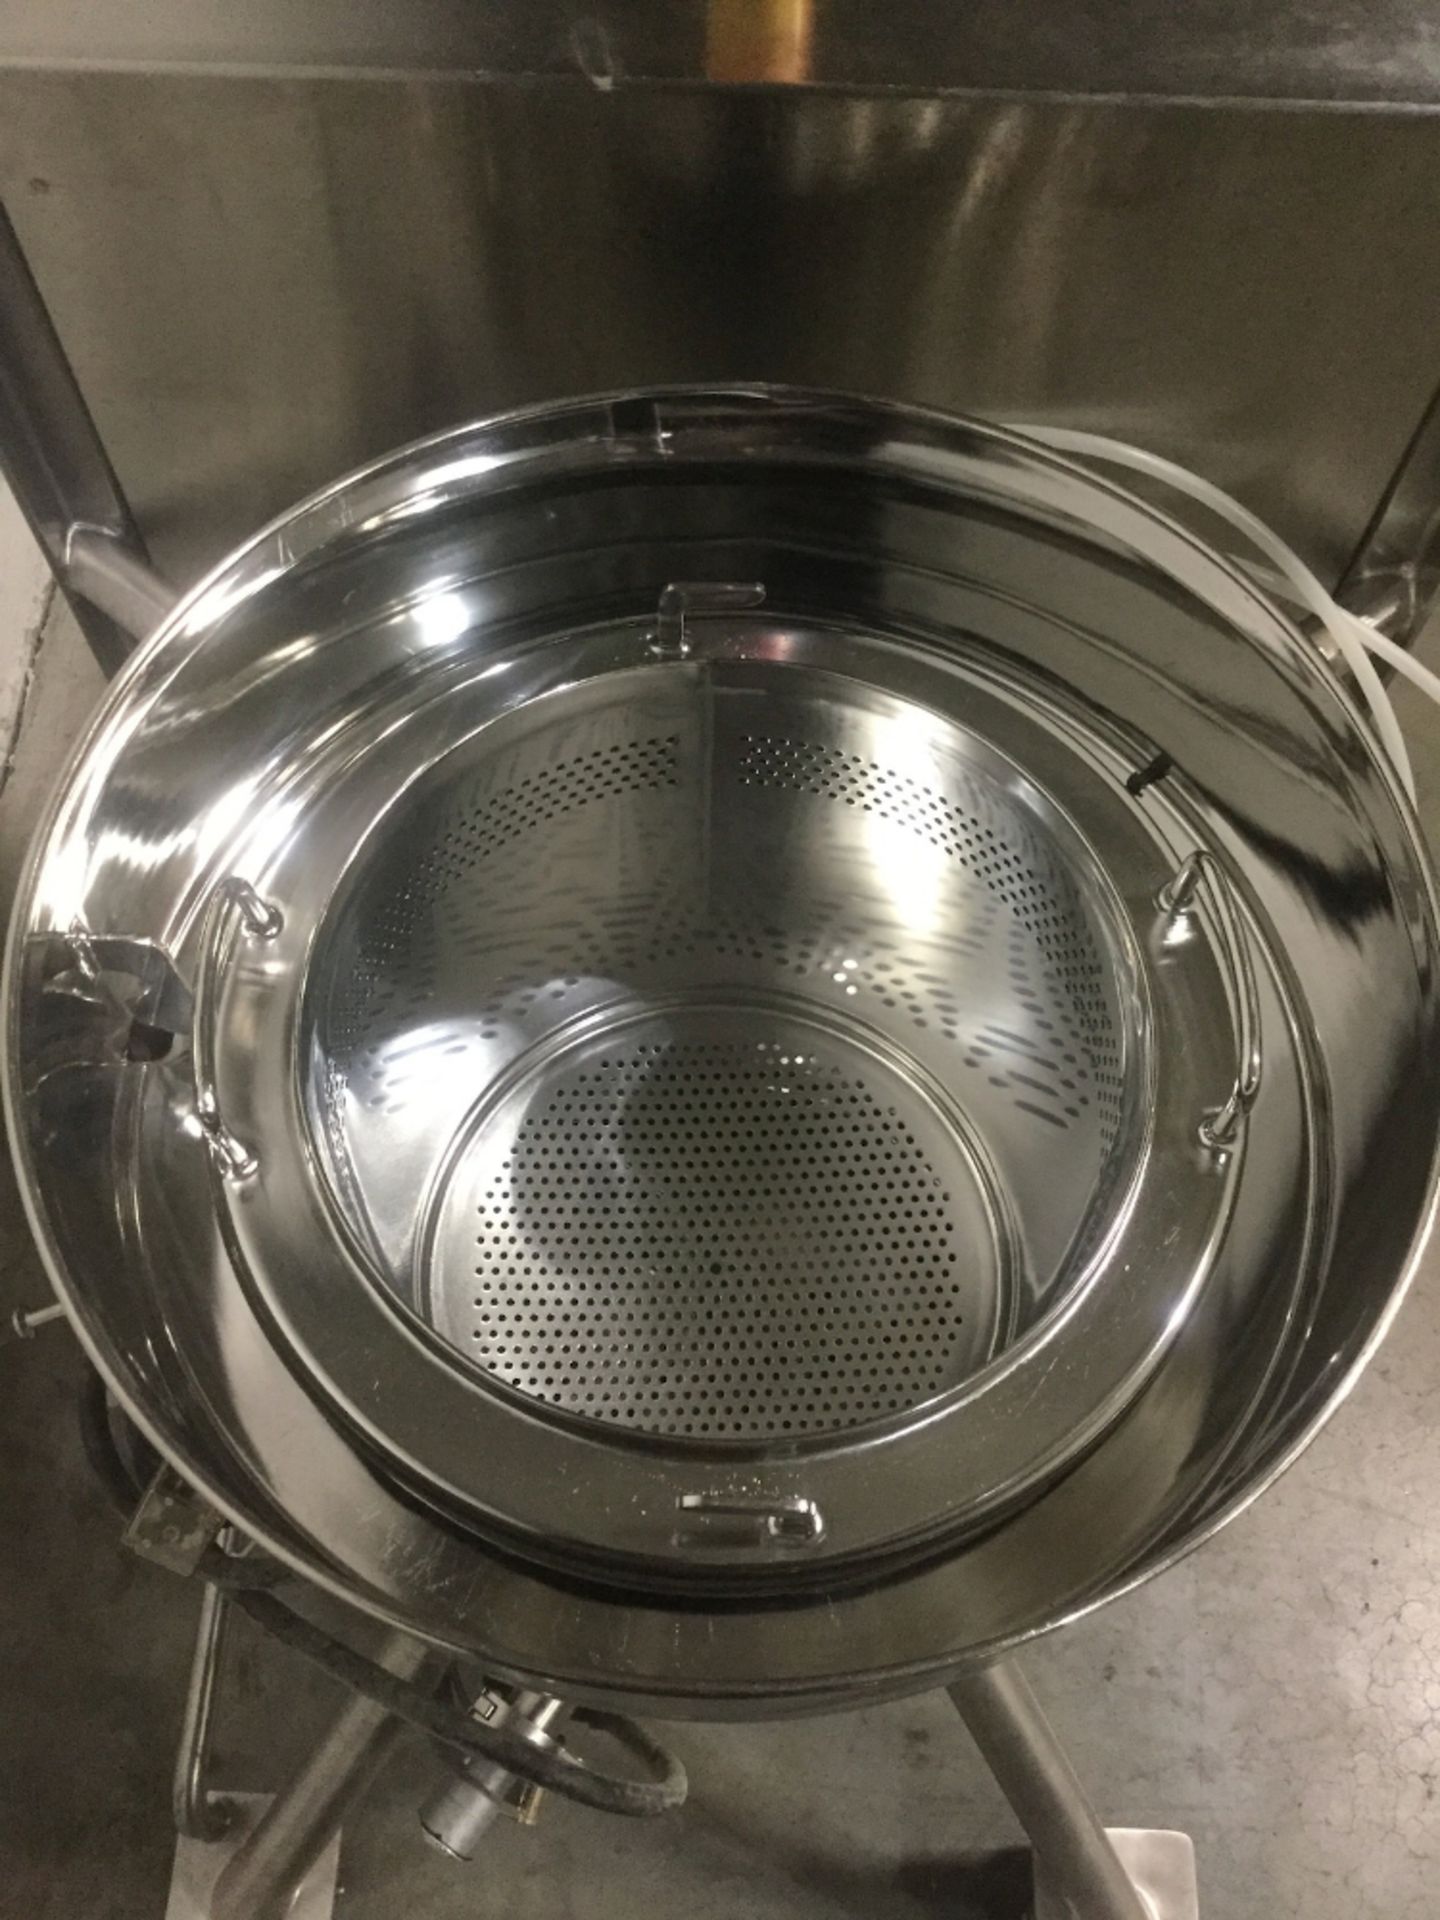 DCI 12 Gallon Stainless Steel Stopper Washer - Image 4 of 7